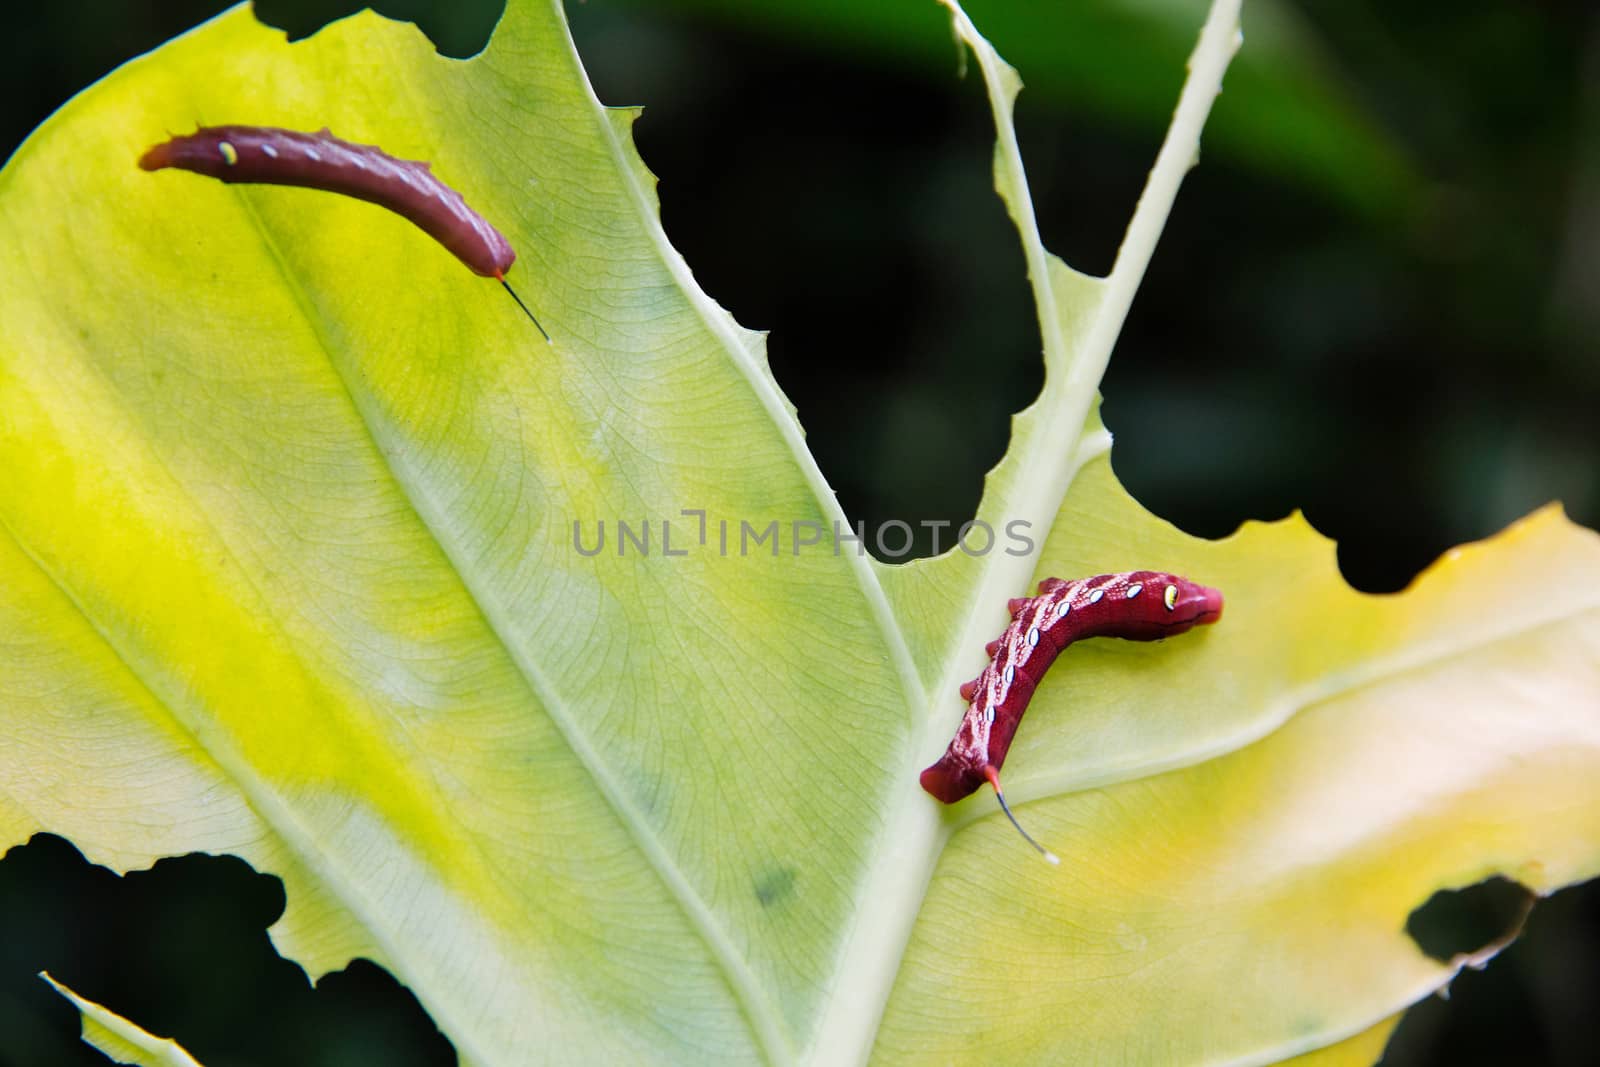 Caterpillar and a chewed leaf